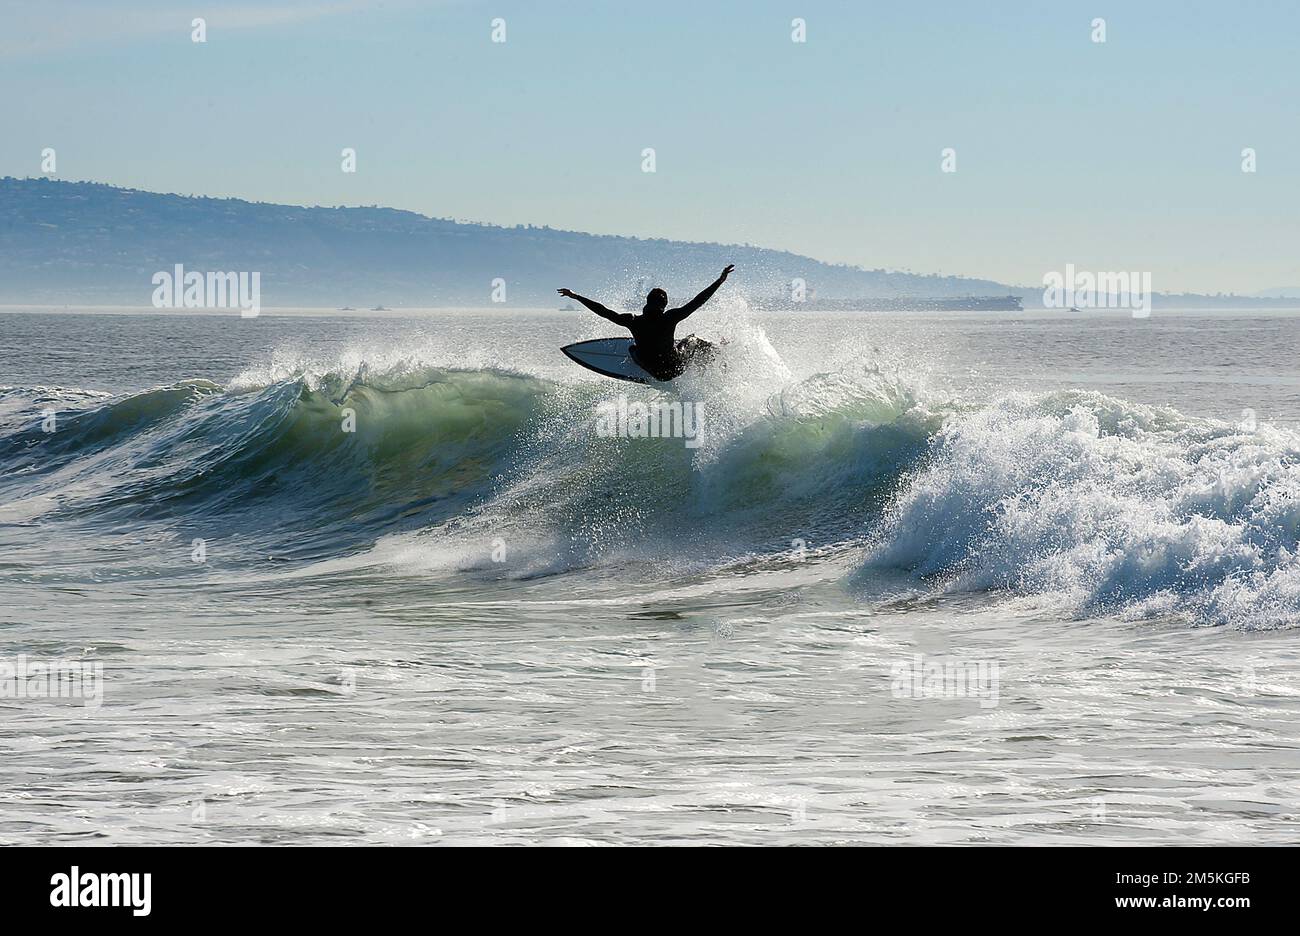 Surfer riding a wave a Venice Beach with the Palos Verdes peninsula in the background in Southern California. Stock Photo